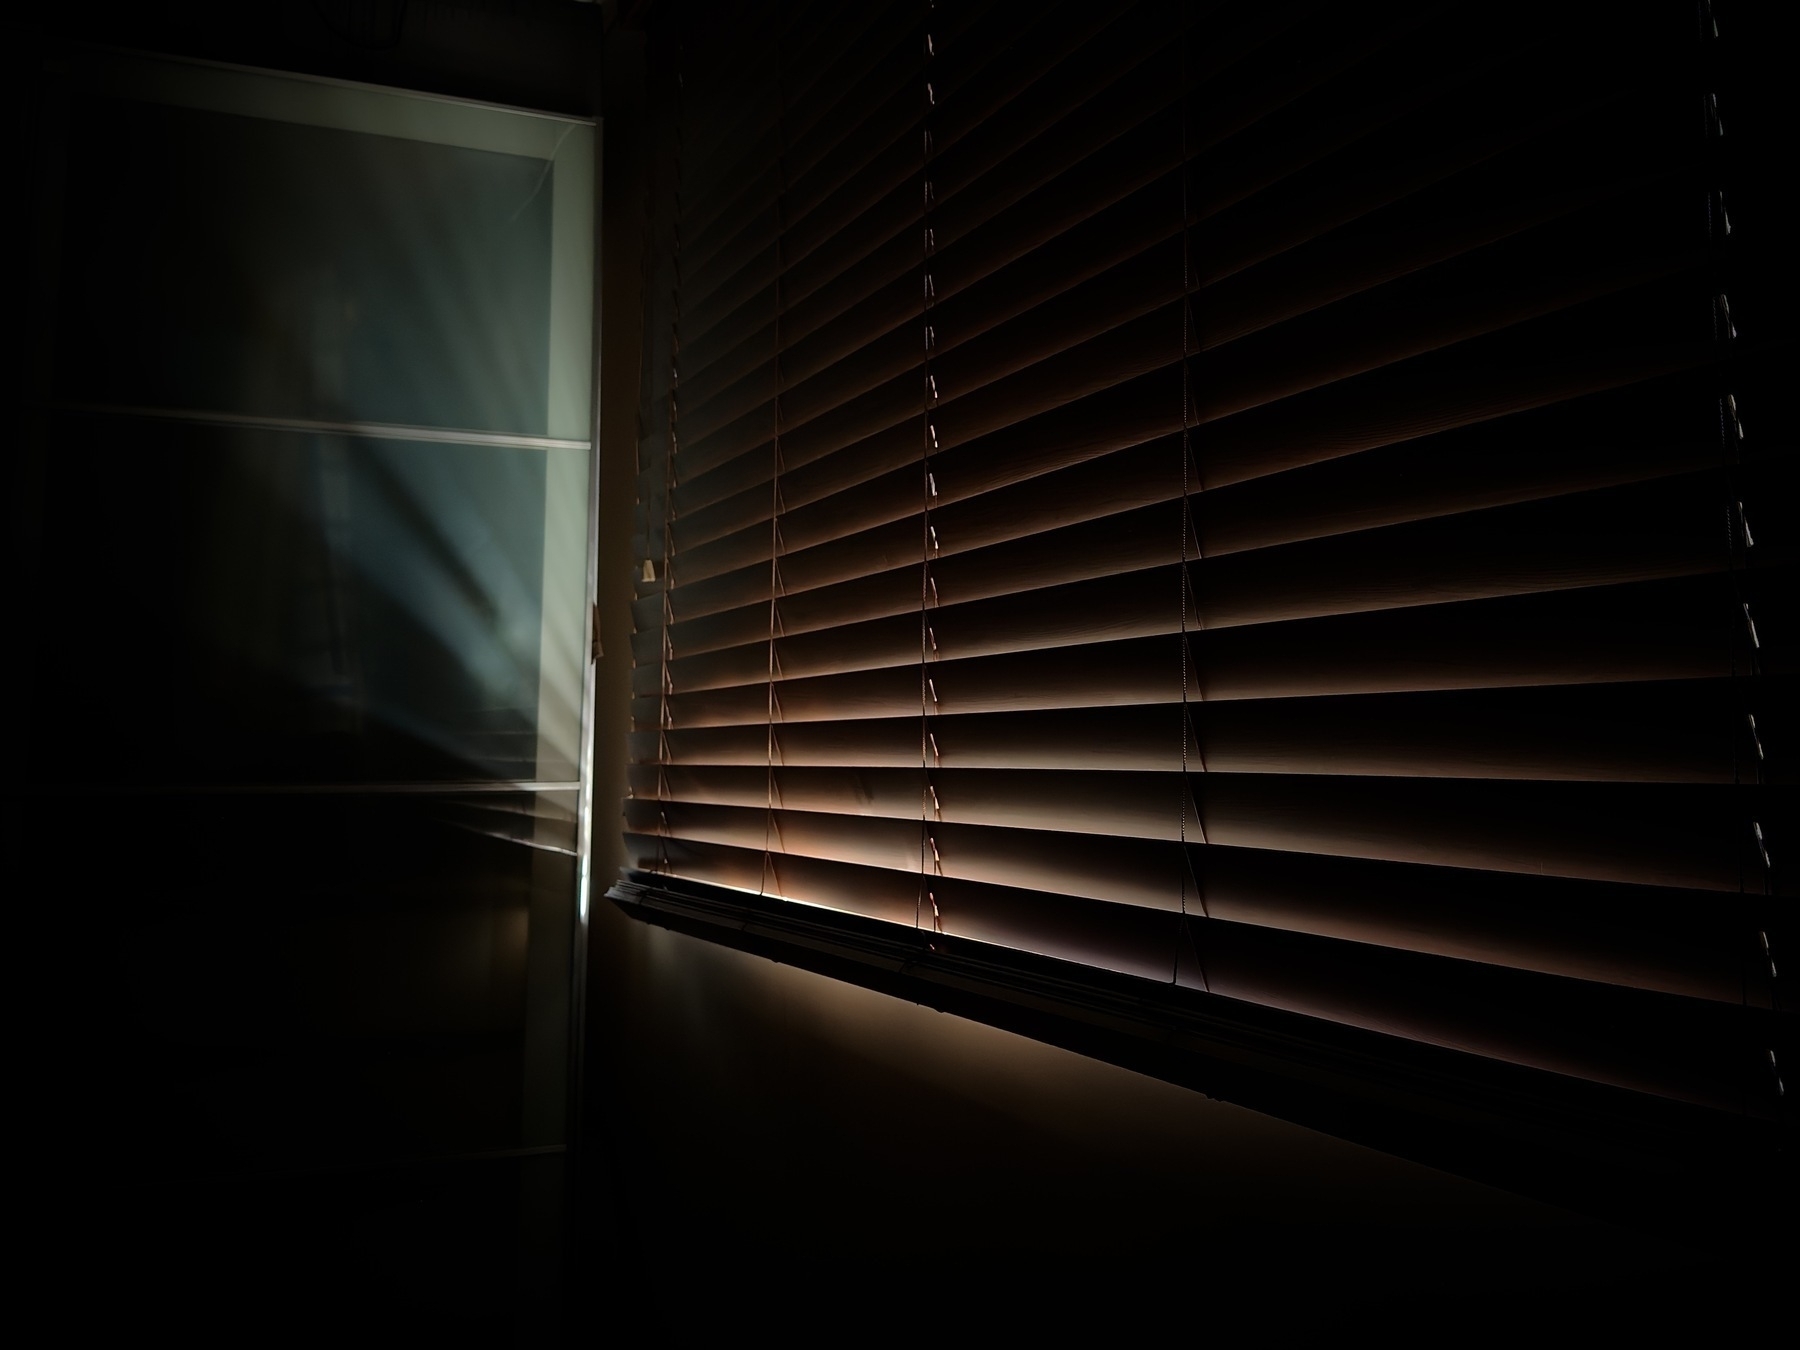 Morning light sneaks through closed wooden slats, hitting the edge of a wardrobe.